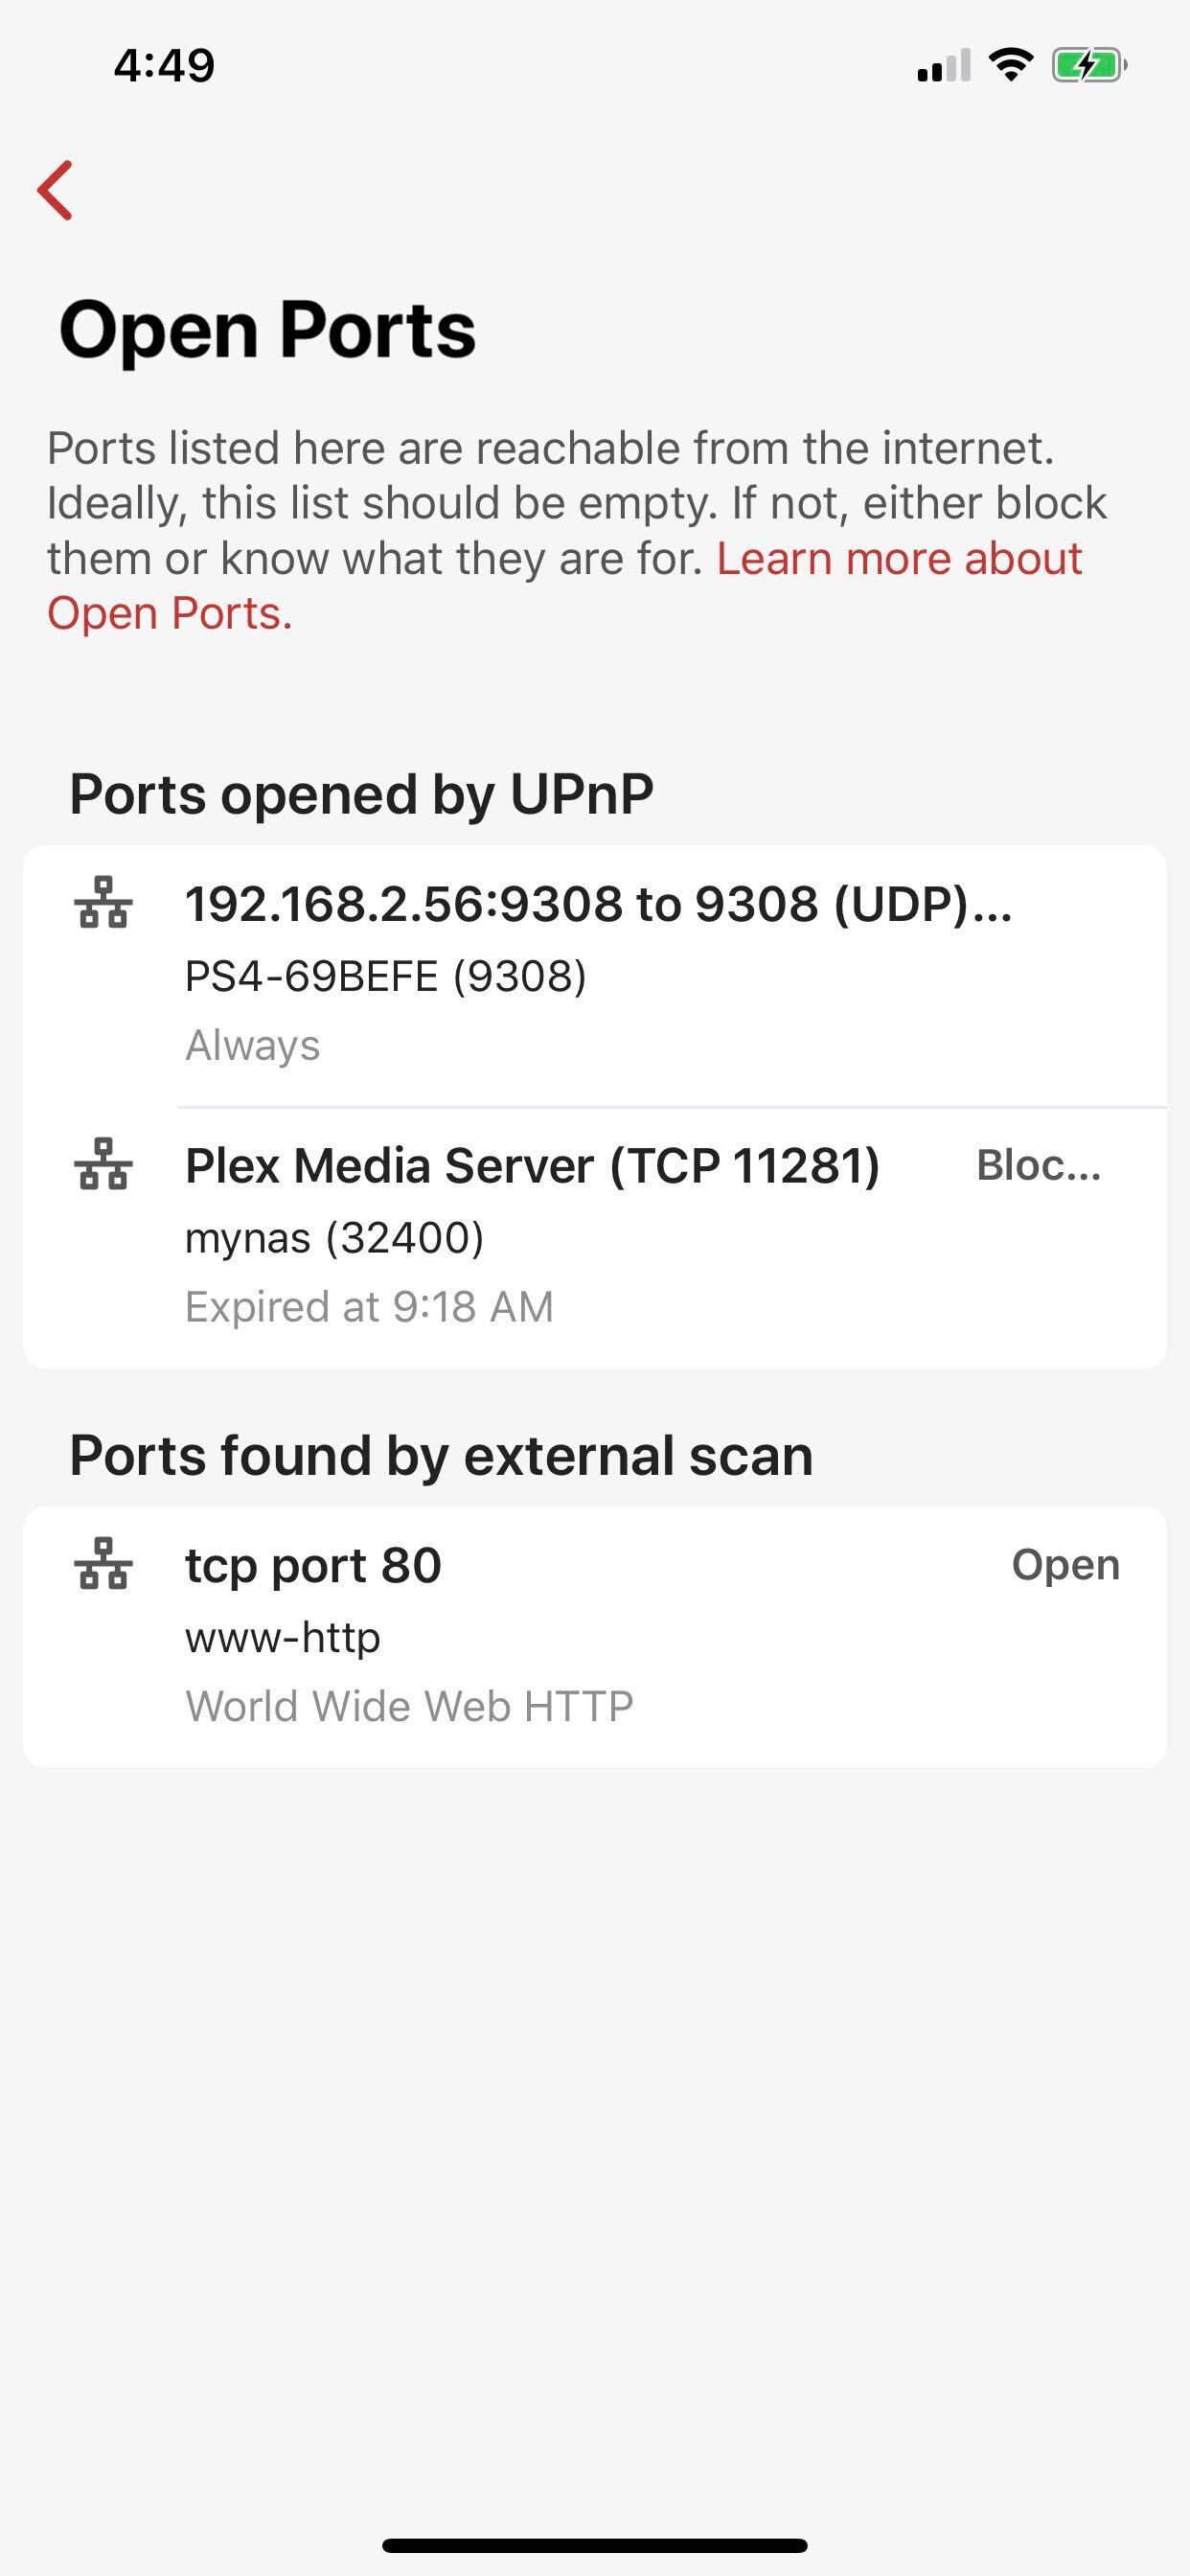 How to secure your network by monitoring Open Ports